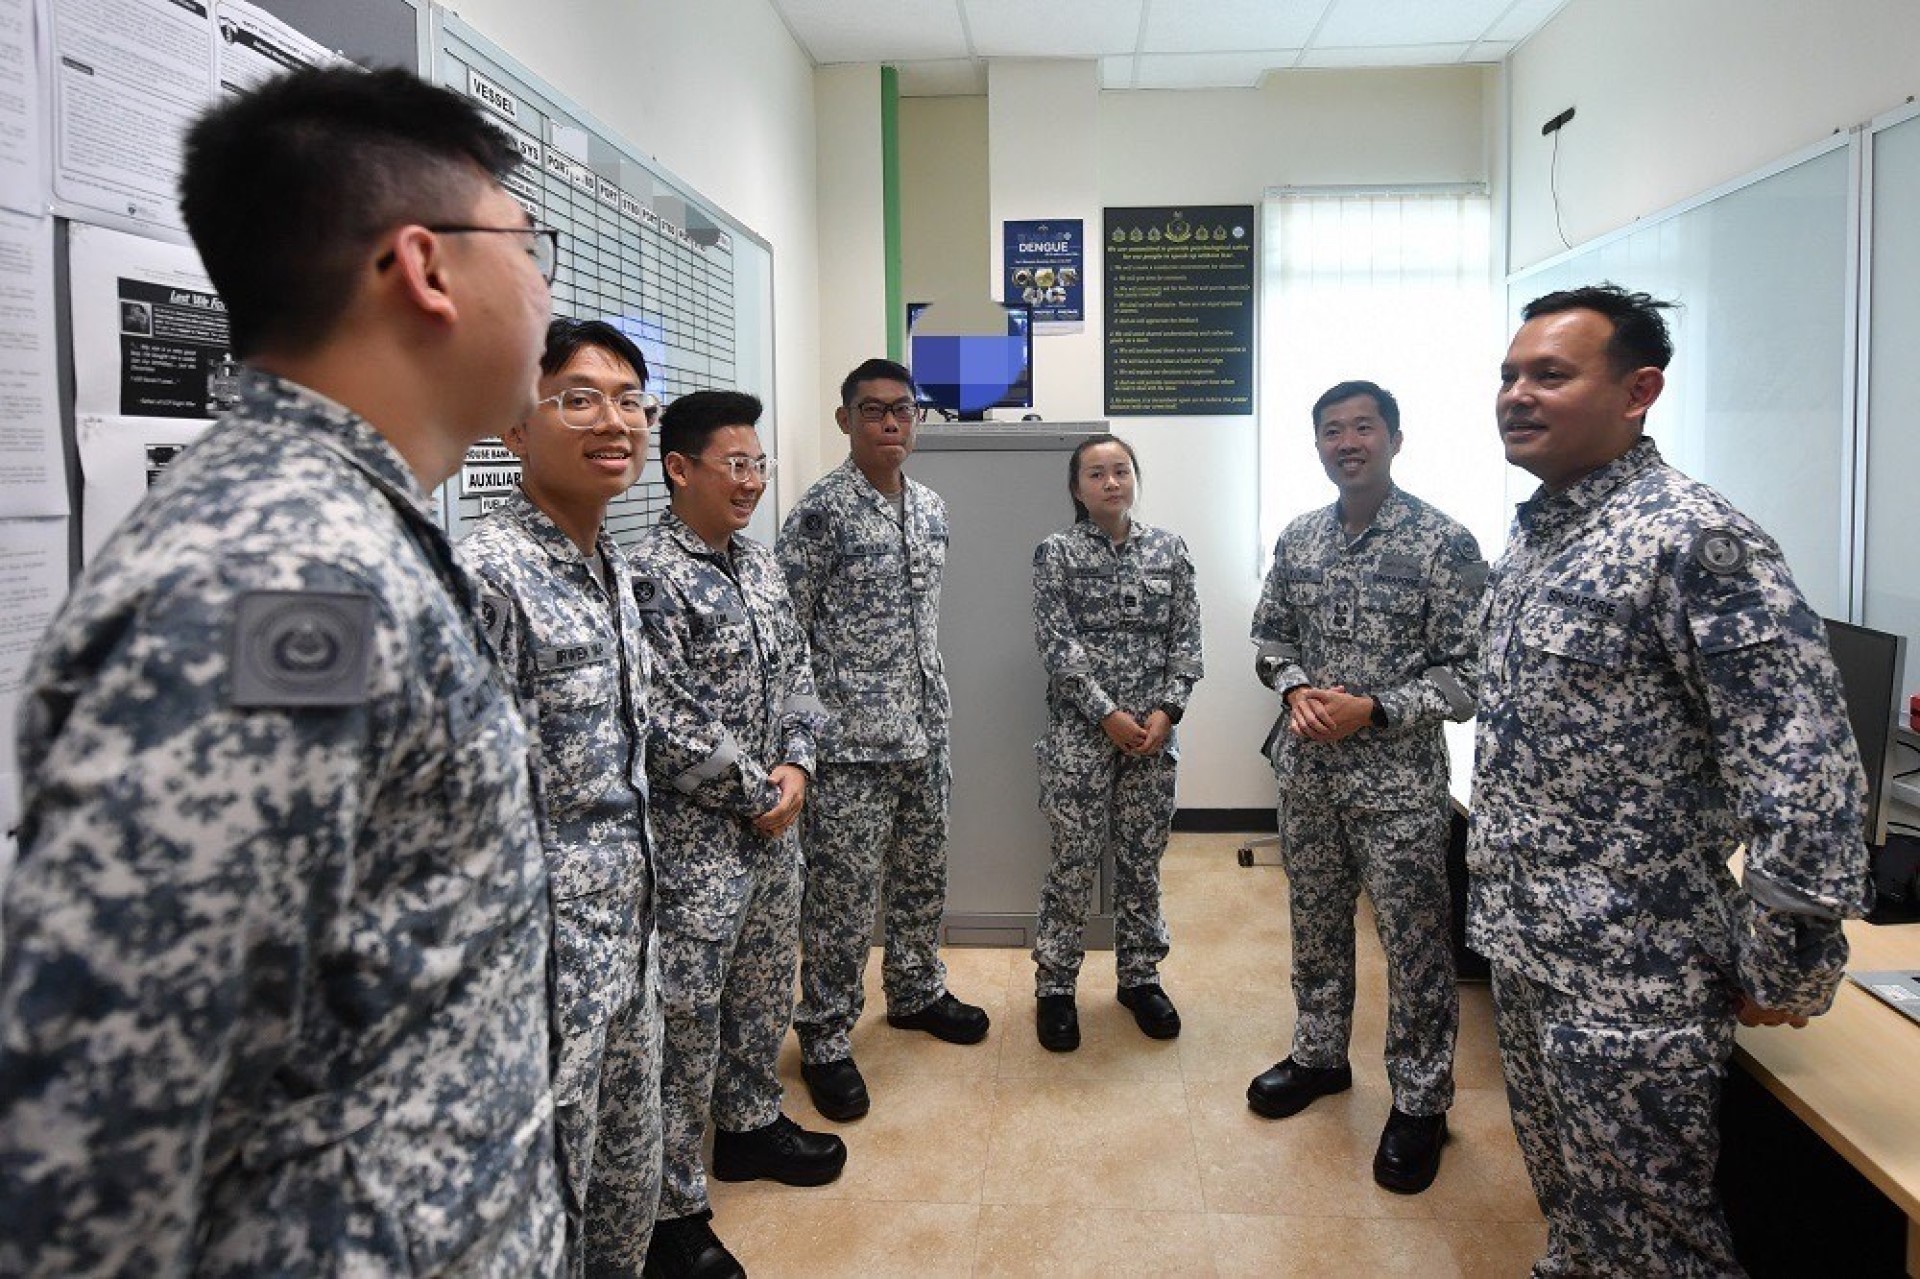 Mr Zaqy (right) engaging RSN personnel, including Full-time National Servicemen from the USV Squadron.